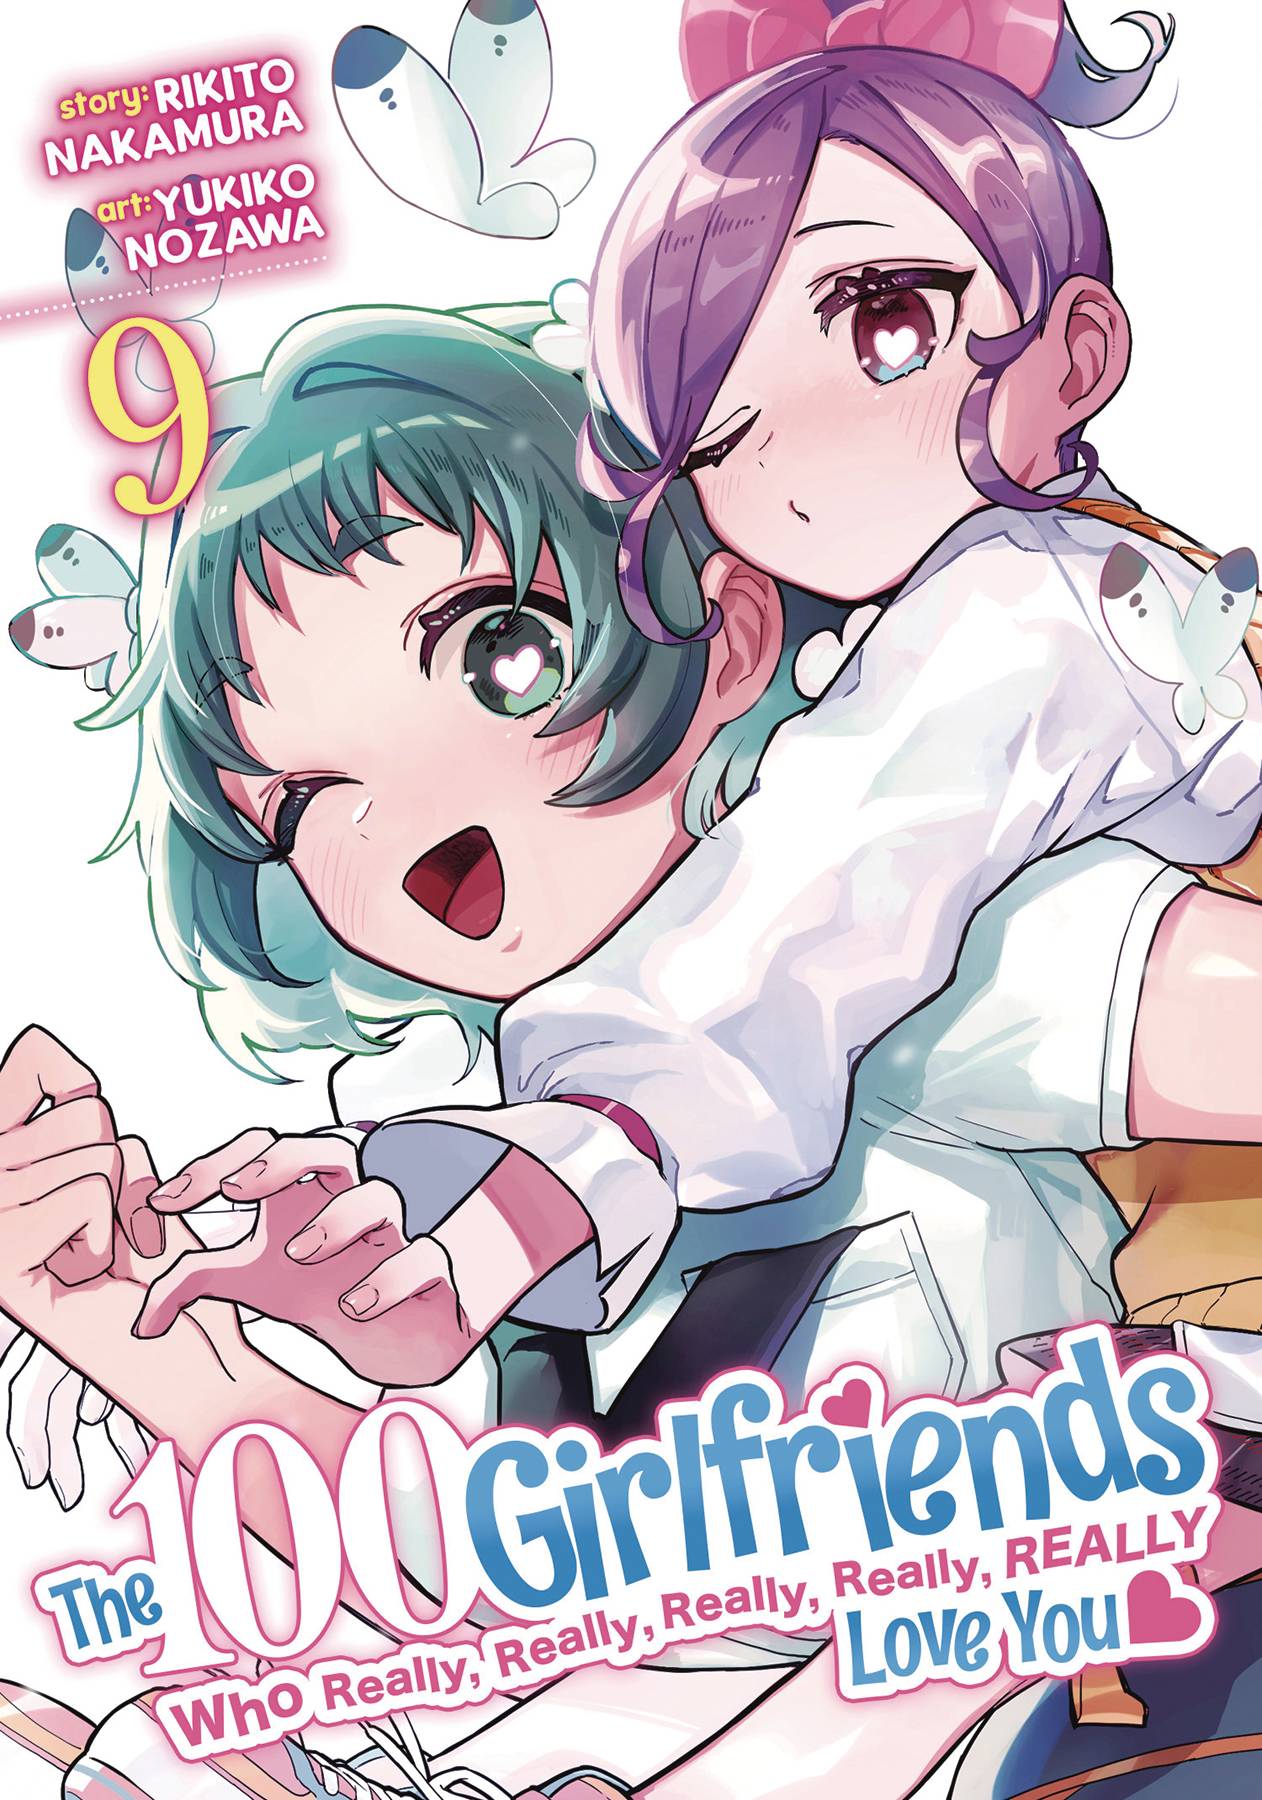 100 GIRLFRIENDS WHO REALLY LOVE YOU GN VOL 09 (MR) (C: 0-1-2